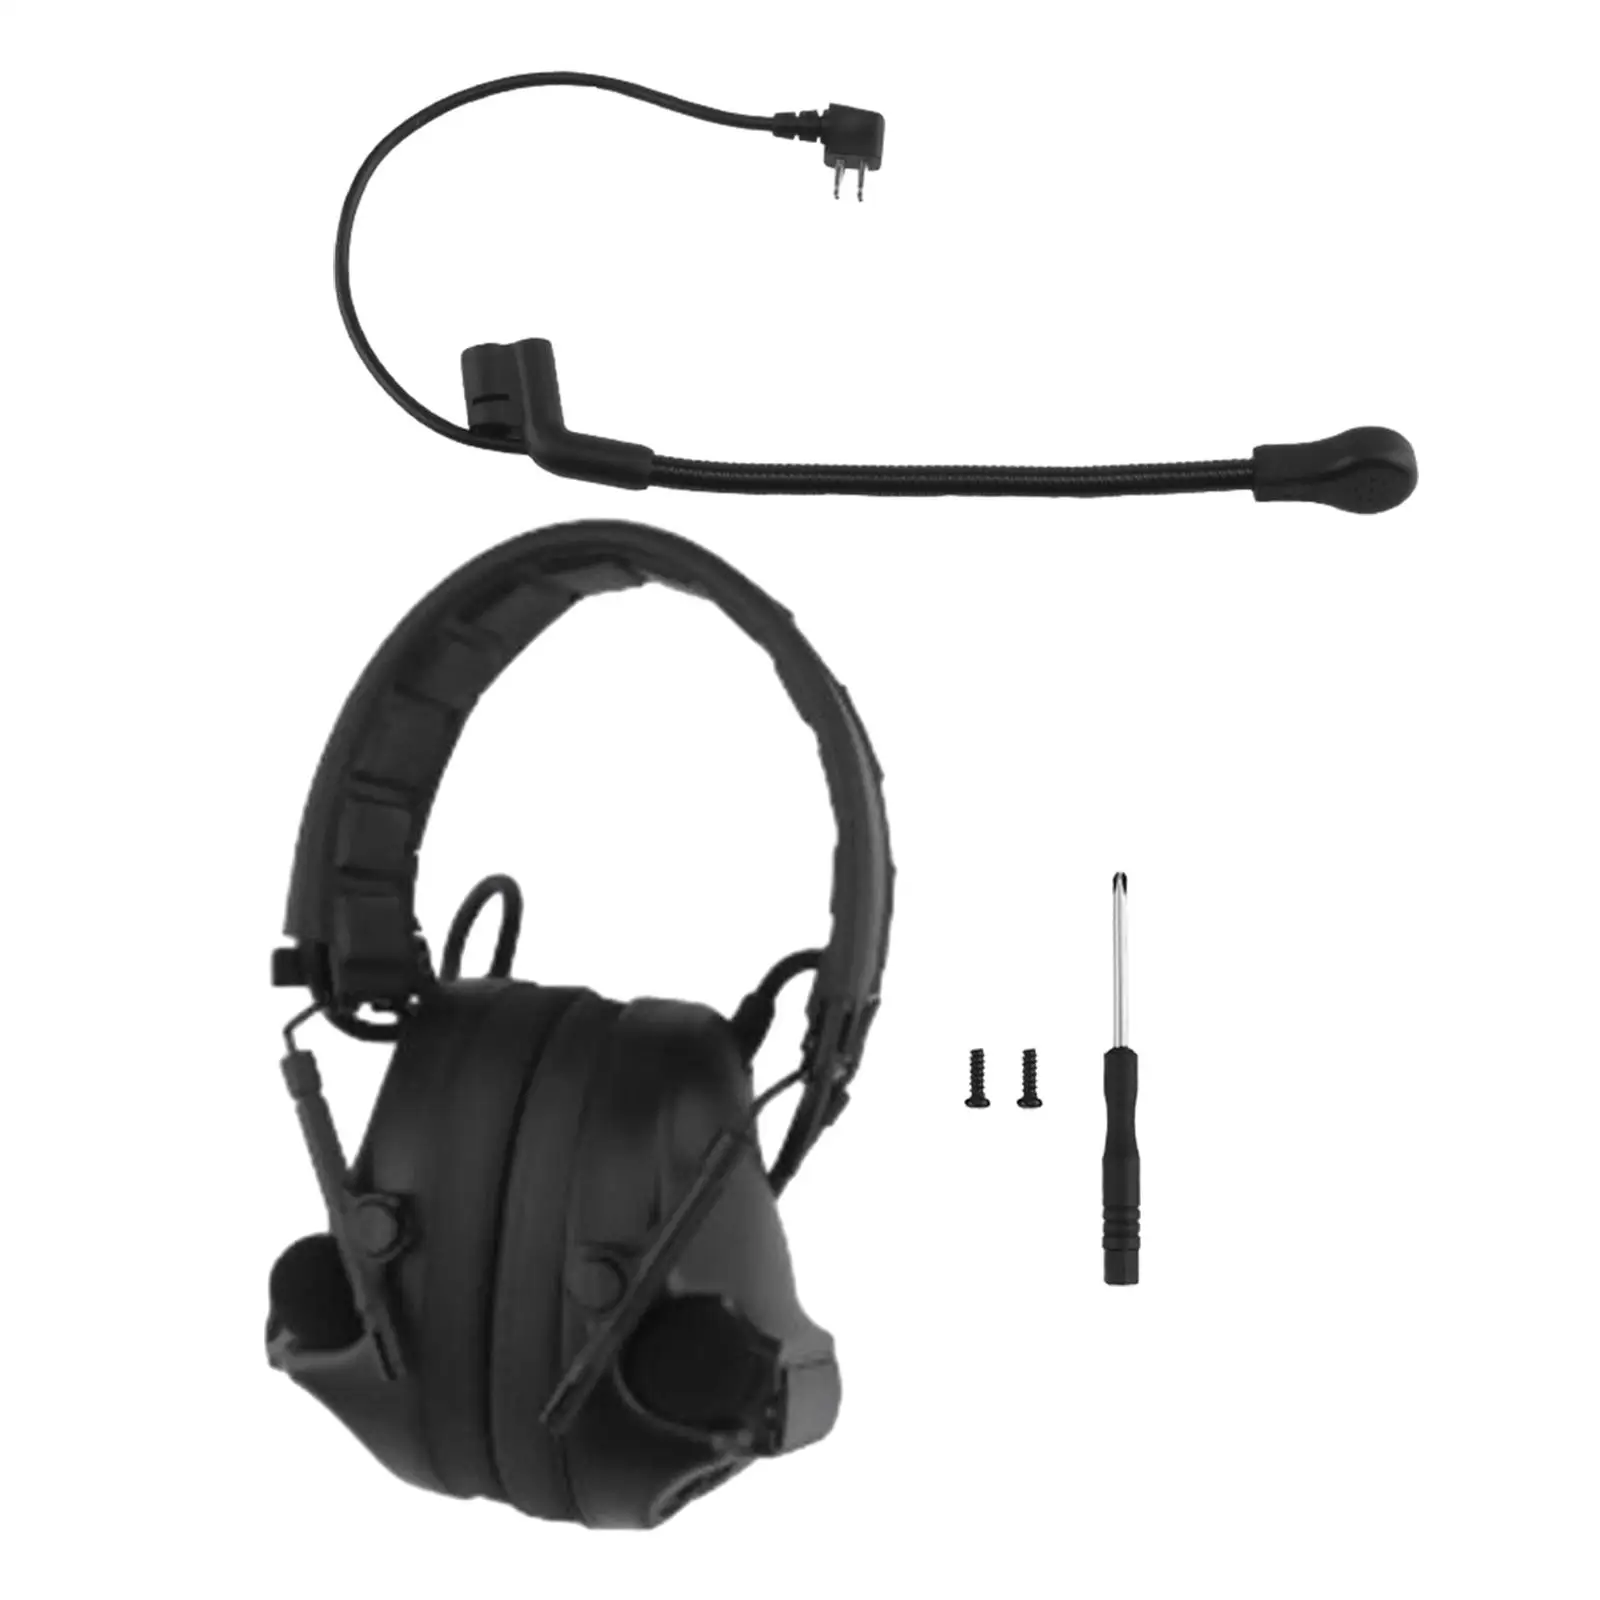 Hearing Ear Protection Soundproof Earmuffs Lightweight Soft Protective Earmuffs for Construction Mowing Learning Sleeping Gaming